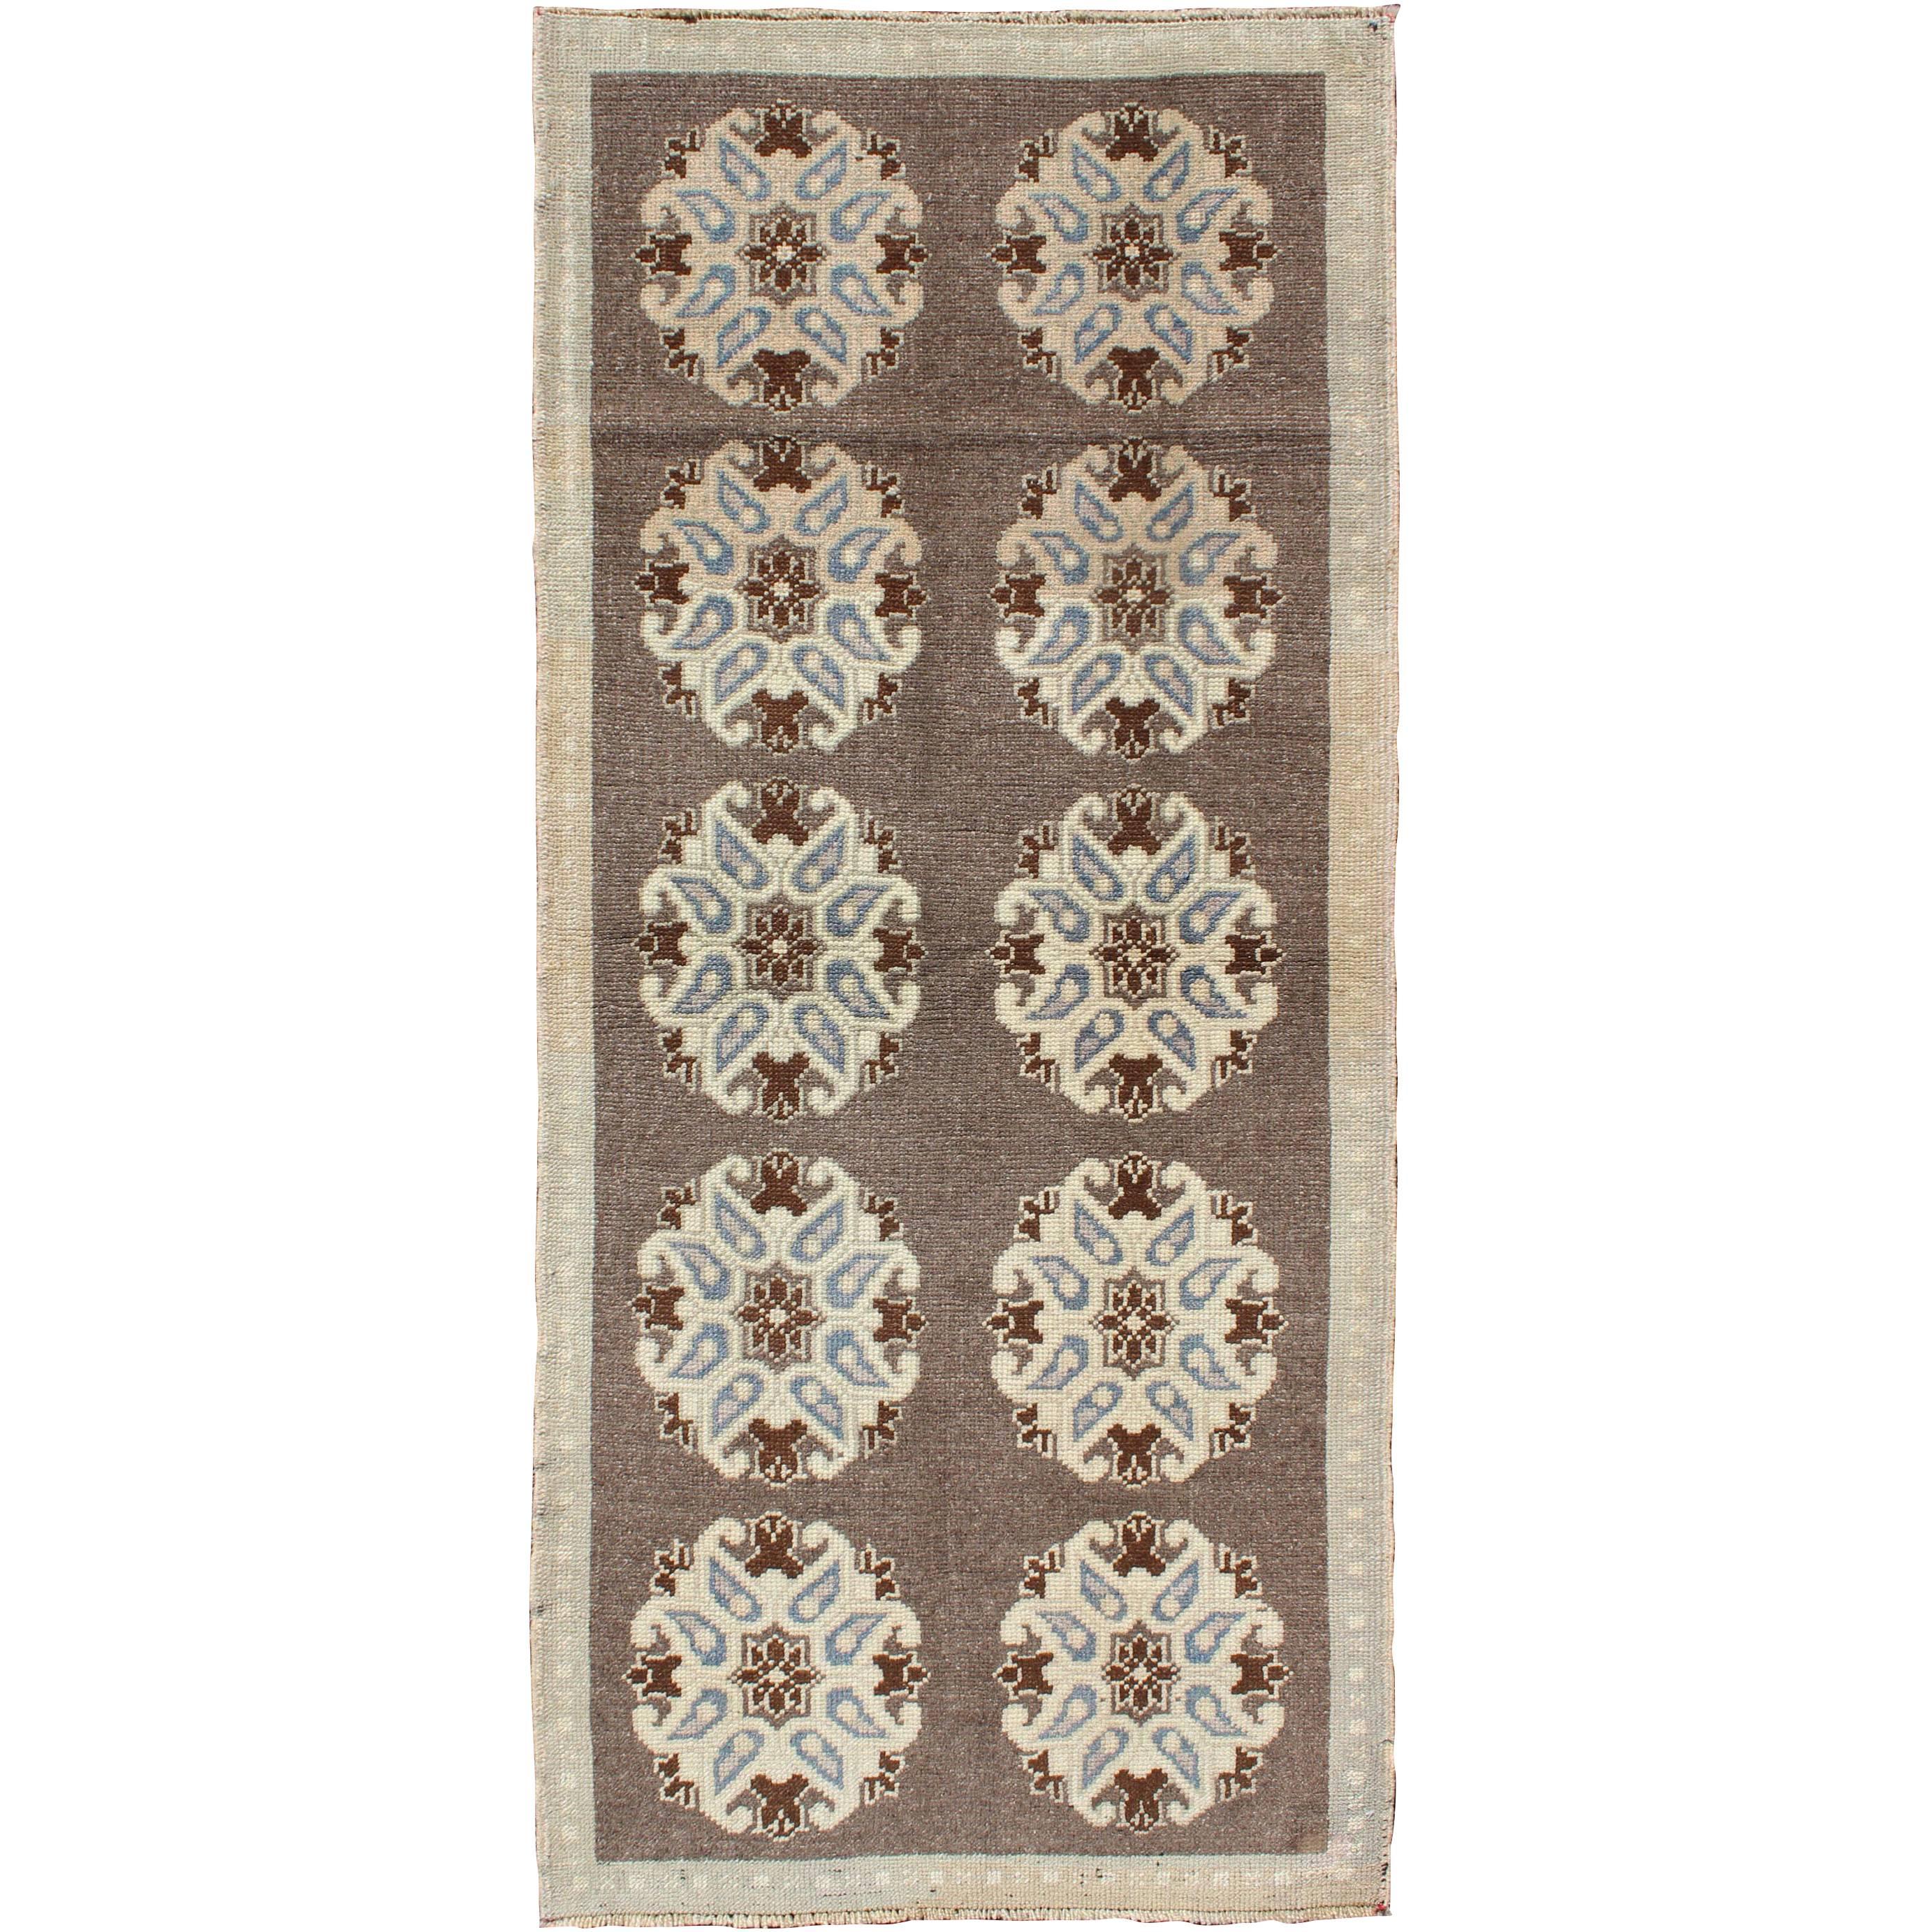 Tribal Turkish Oushak Carpet with Floral Medallions in Taupe, Ivory and Blue For Sale